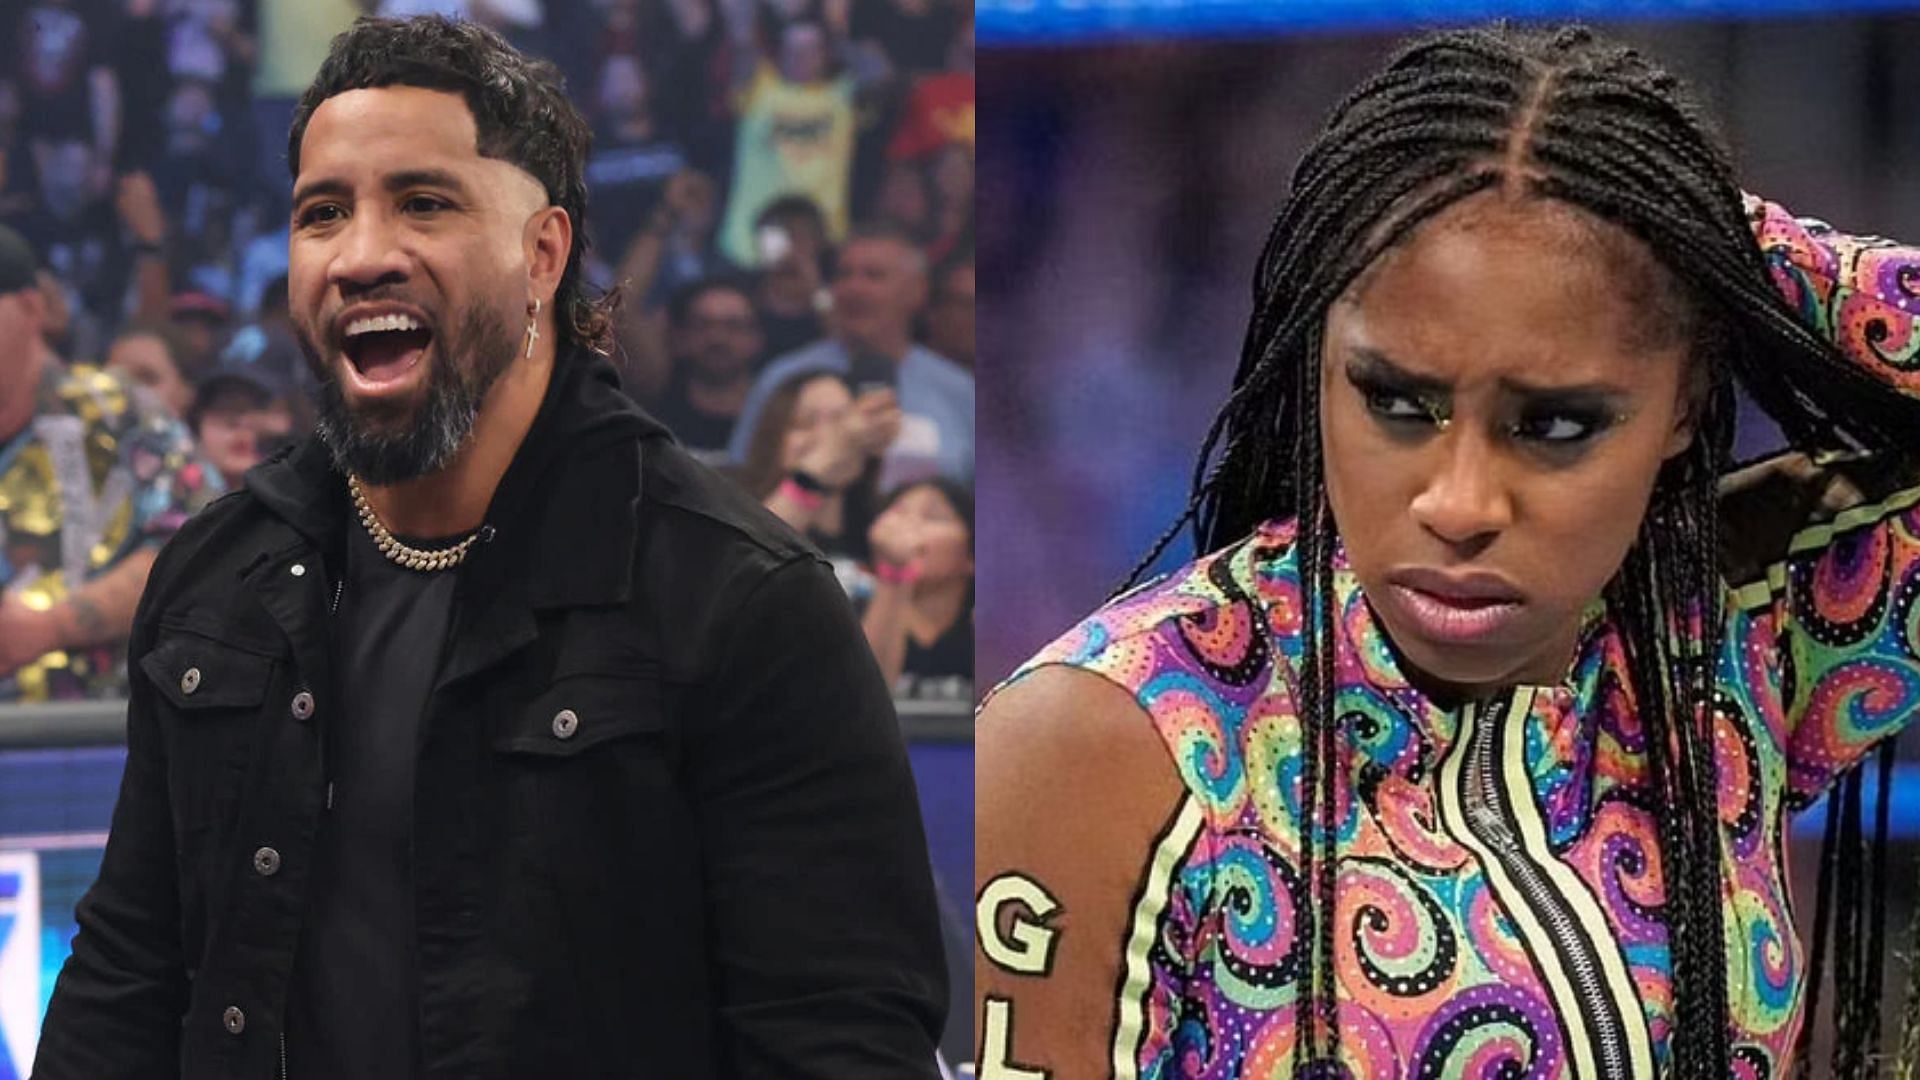 Jey Uso quit WWE on the SmackDown after SummerSlam.